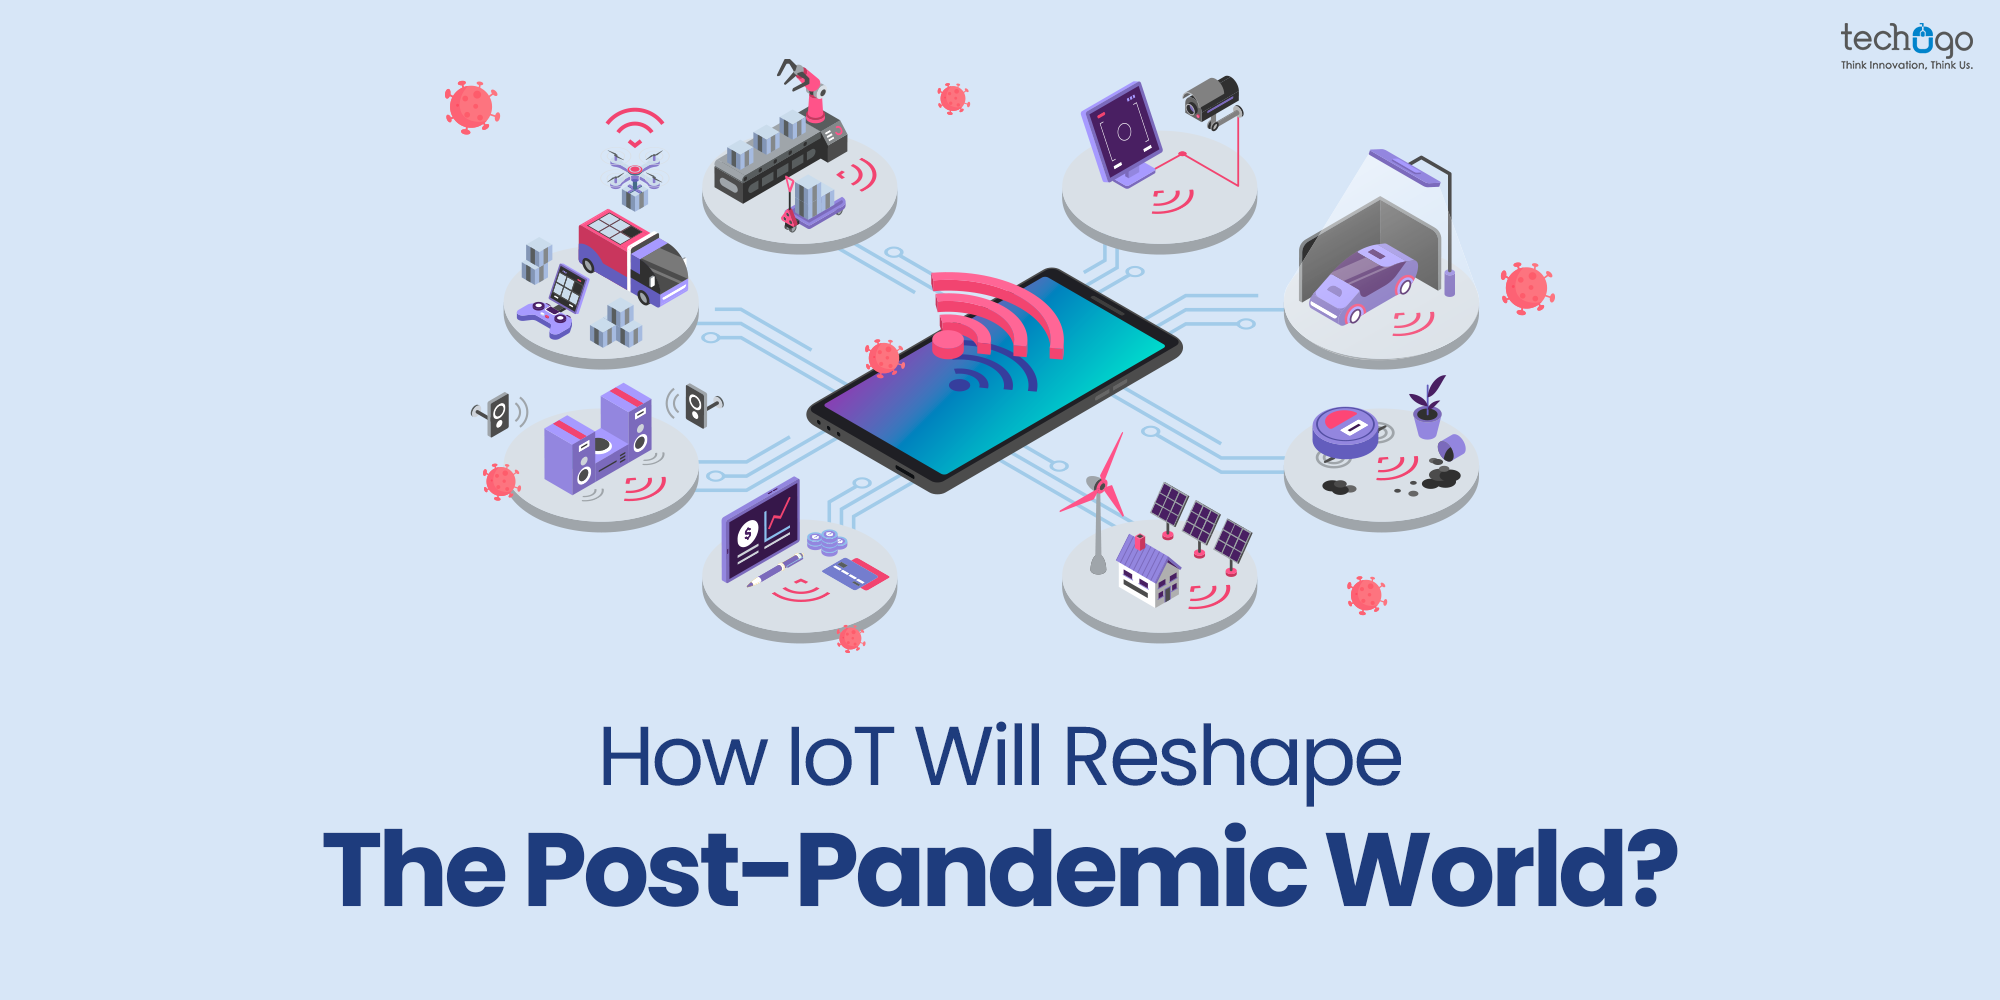 HOW IOT WILL RESHAPE THE POST-PANDEMIC WORLD?